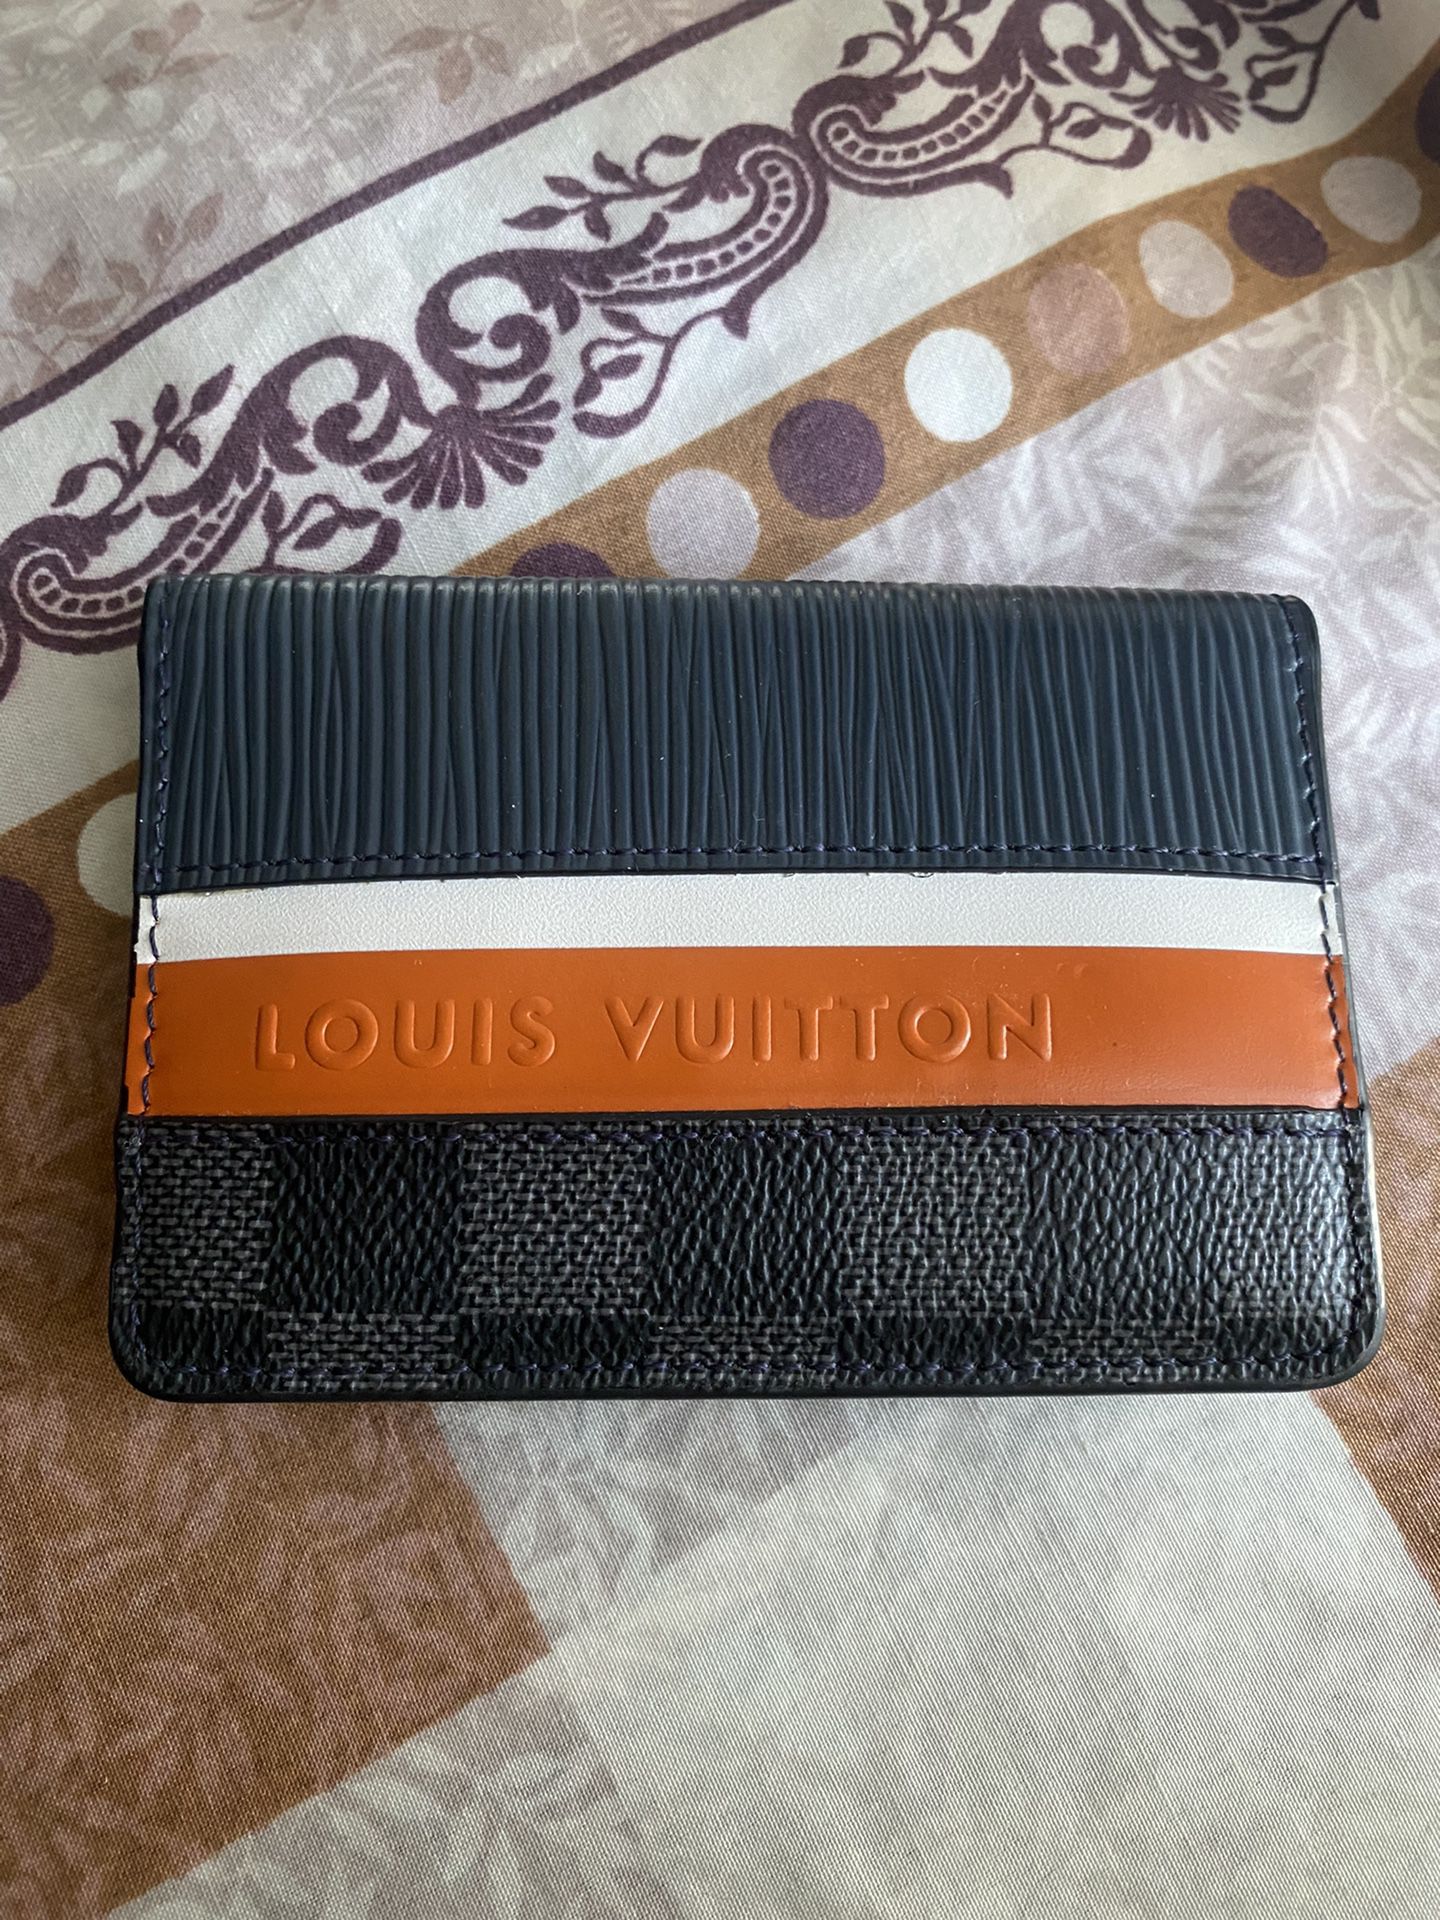 Duplicate Designer Wallets Top Quality for Sale in Irvine, CA - OfferUp